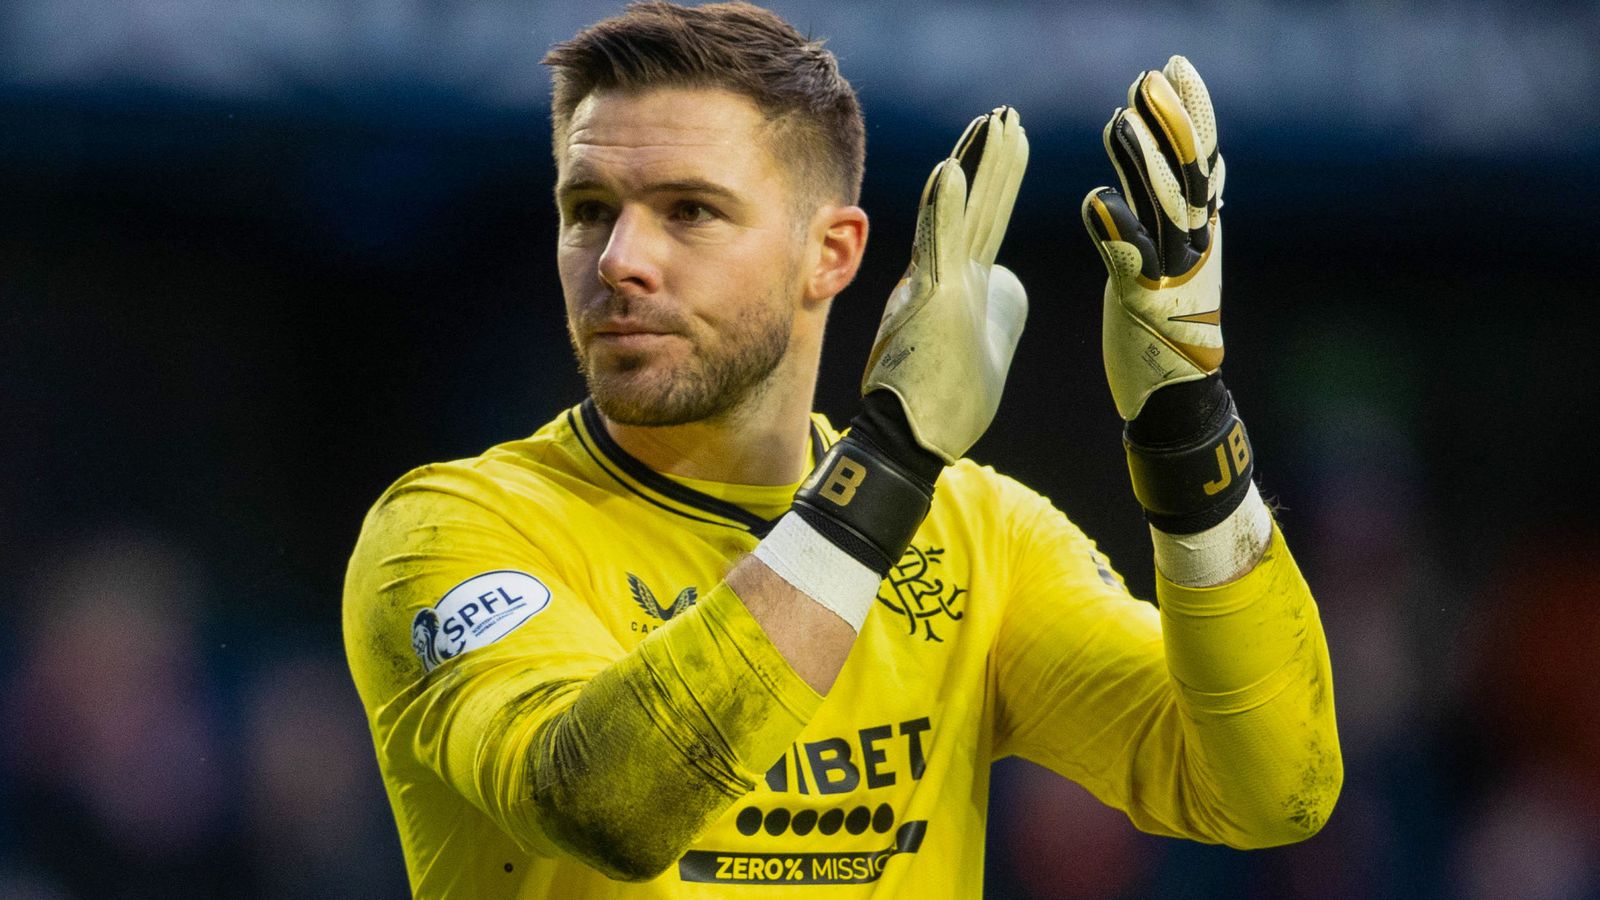 Rangers goalkeeper Butland in contention for England recall